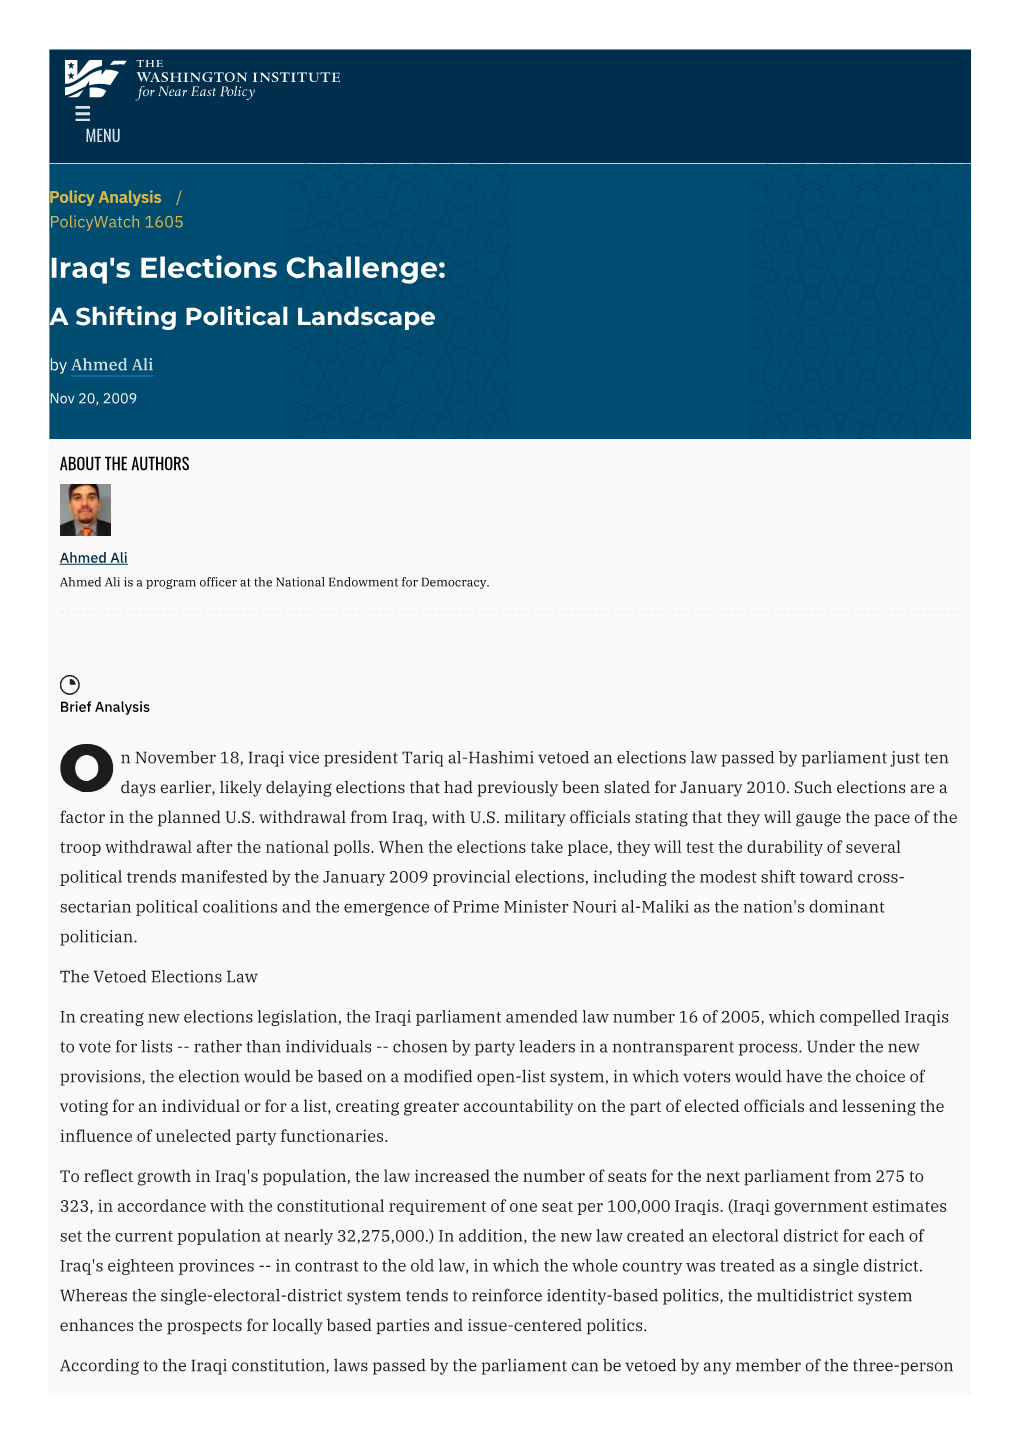 Iraq's Elections Challenge: a Shifting Political Landscape by Ahmed Ali